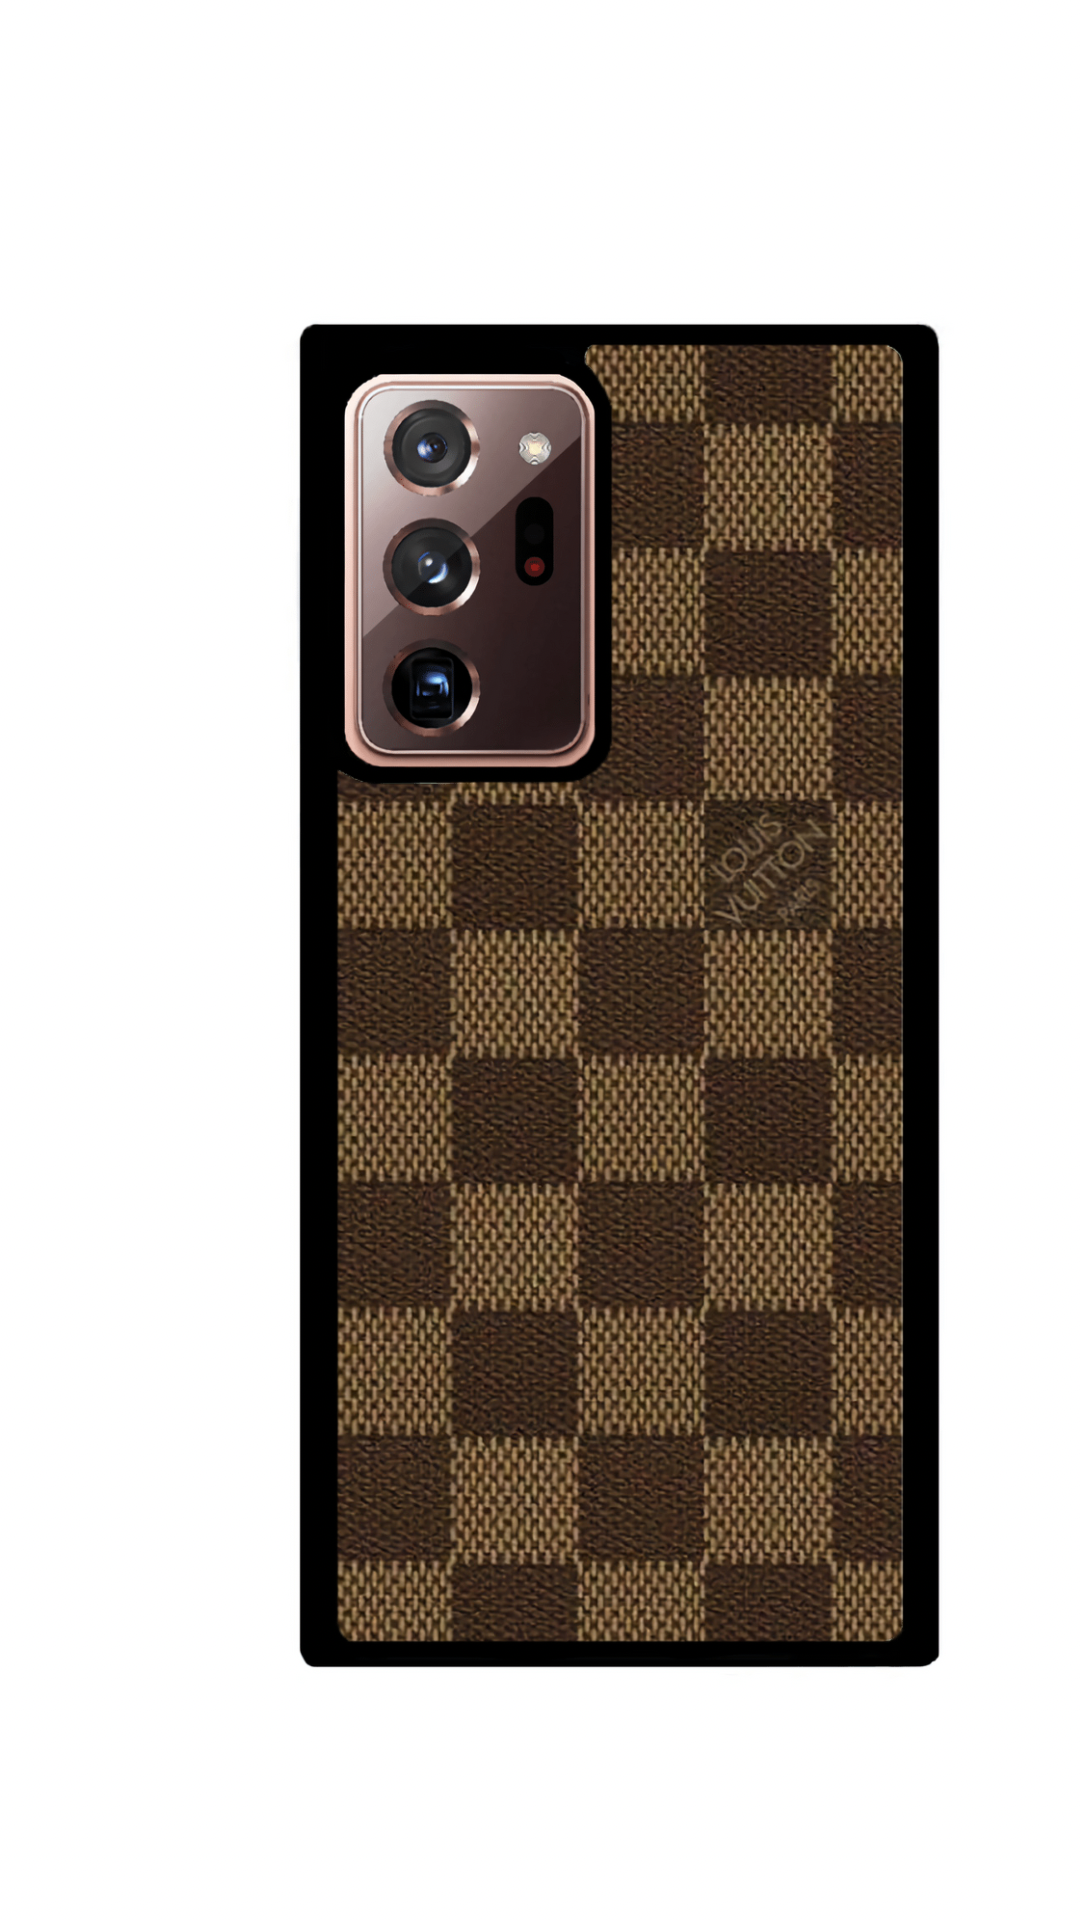 ✓ (4.9/5), pattern, Get stylish protection for your iPhone with premium LV.  High-quality case, a range of stylish patterns & colors. Protect your phone  in style., By Wikiphonecases